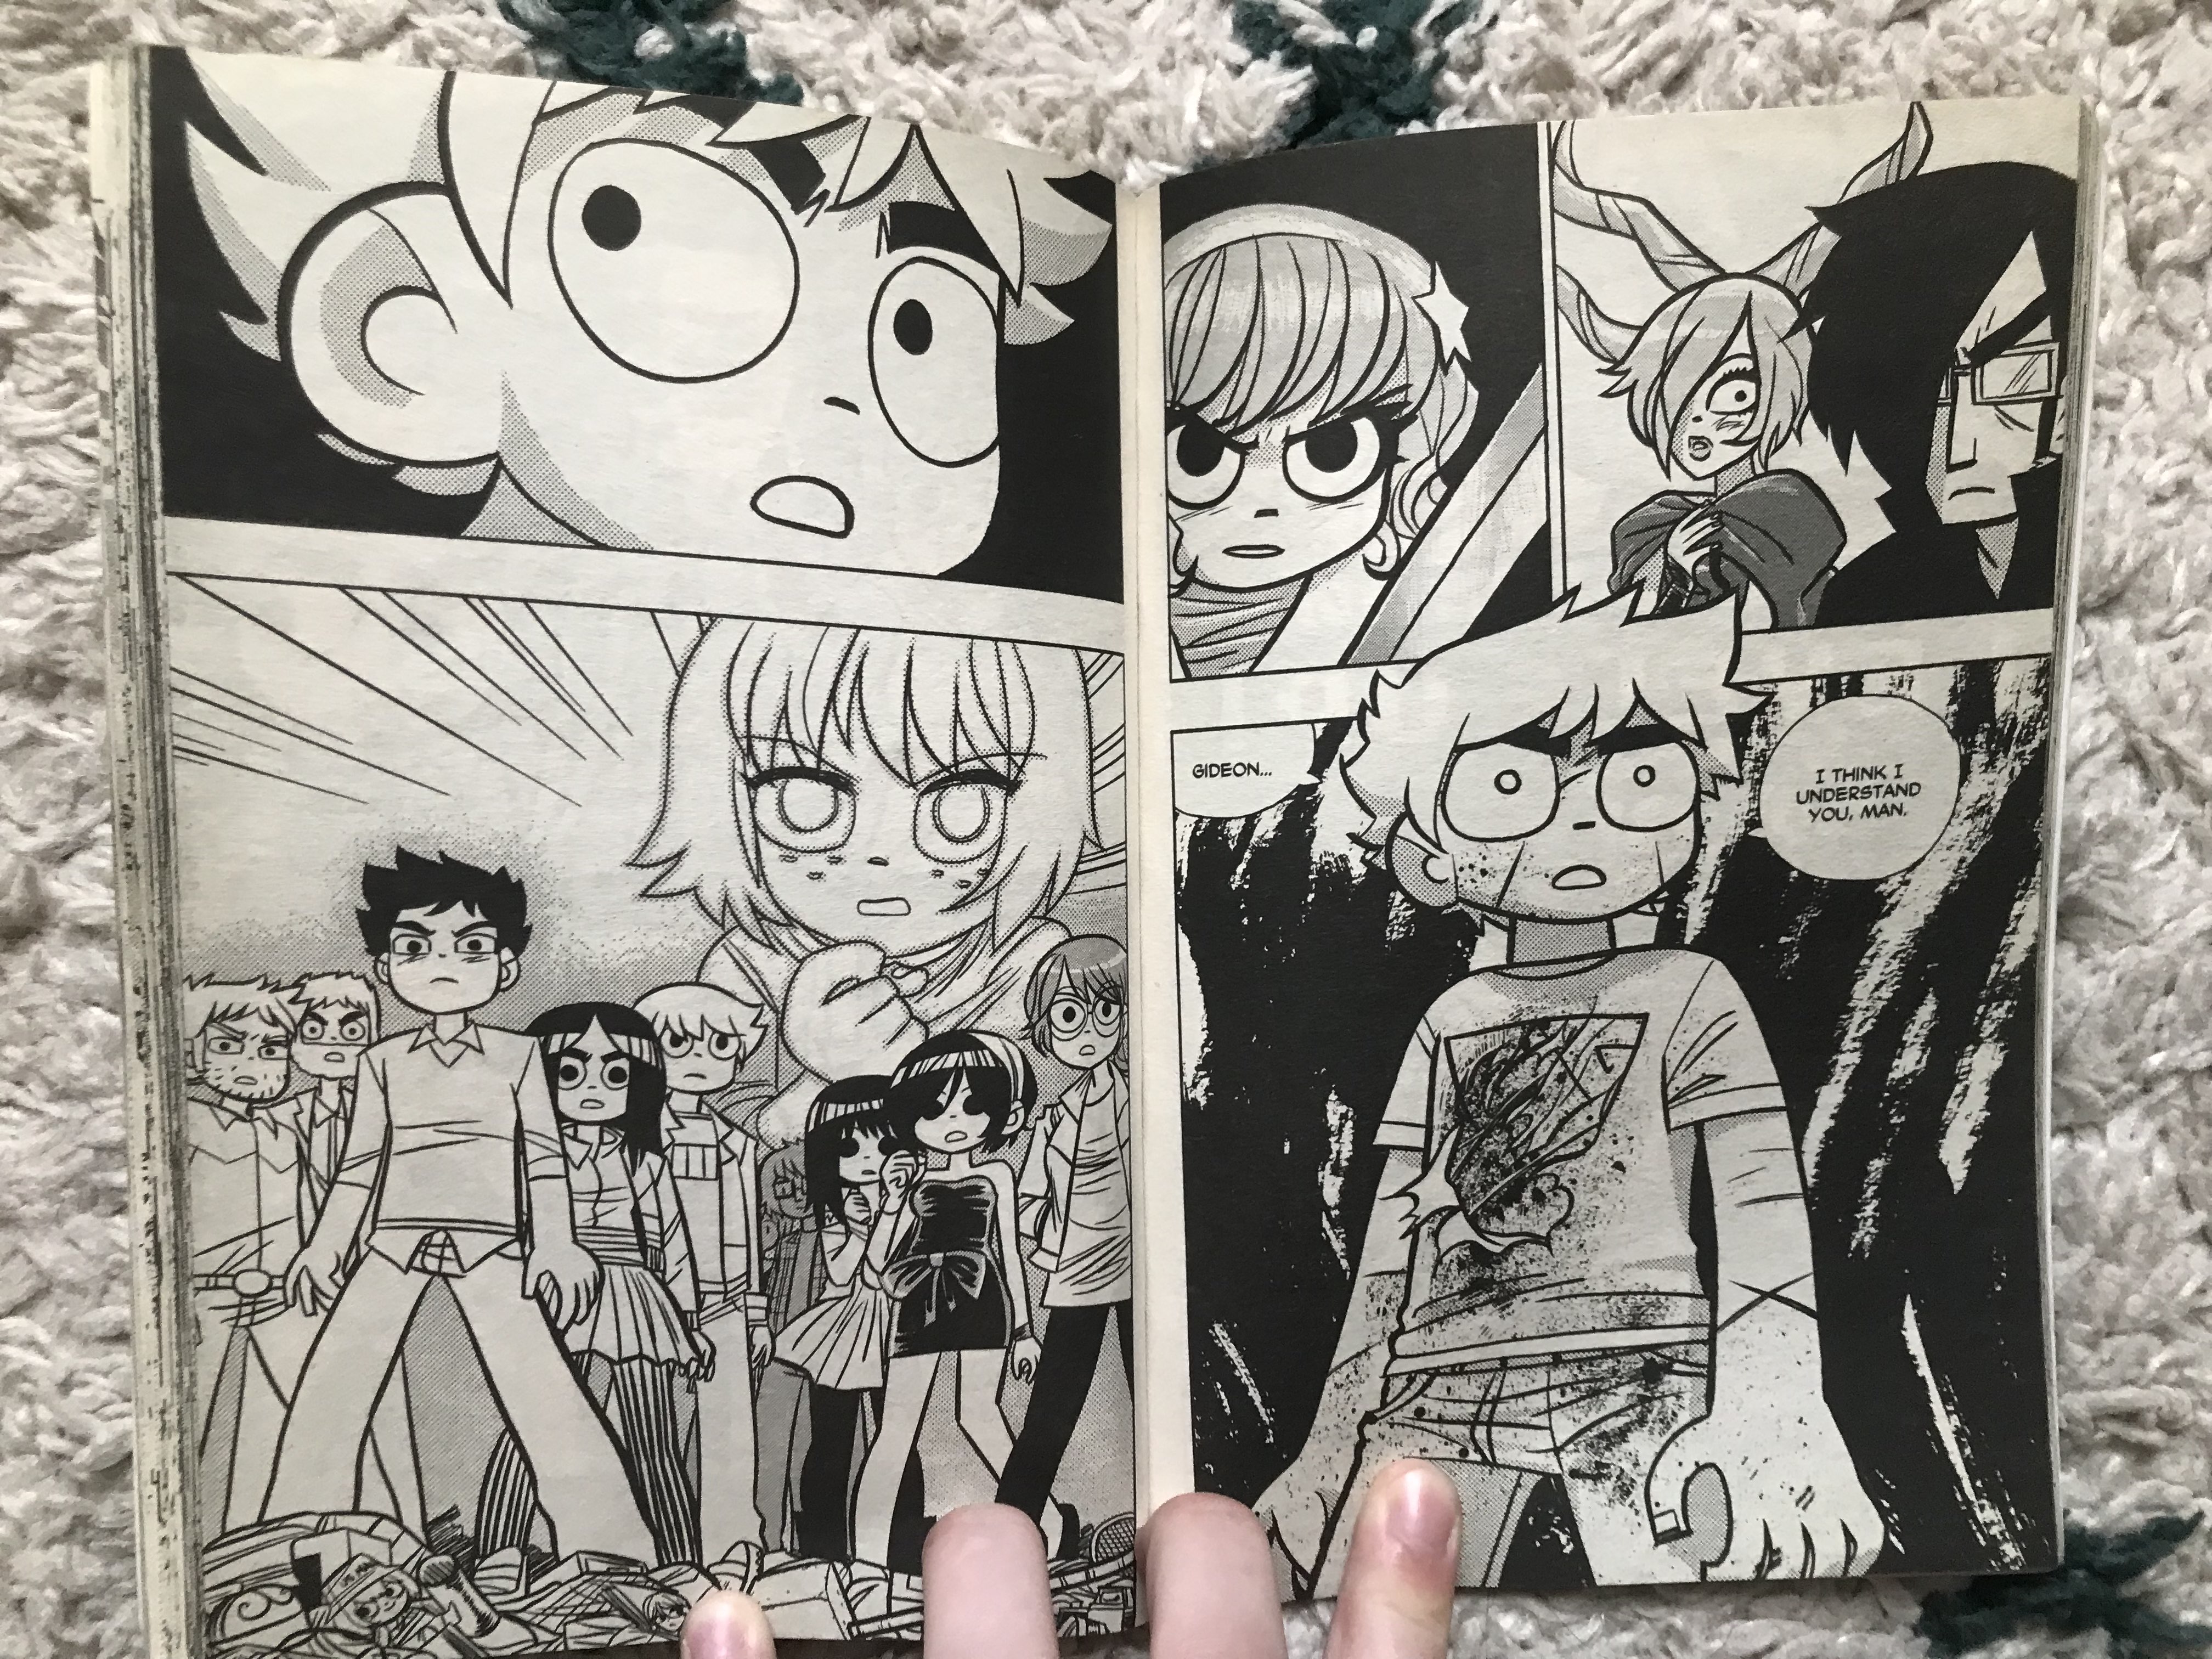 A photo of two pages from Scott Pilgrim, showing Scott, in the final fight with Gideon, with the supporting characters behind him, saying that he understands Gideon.